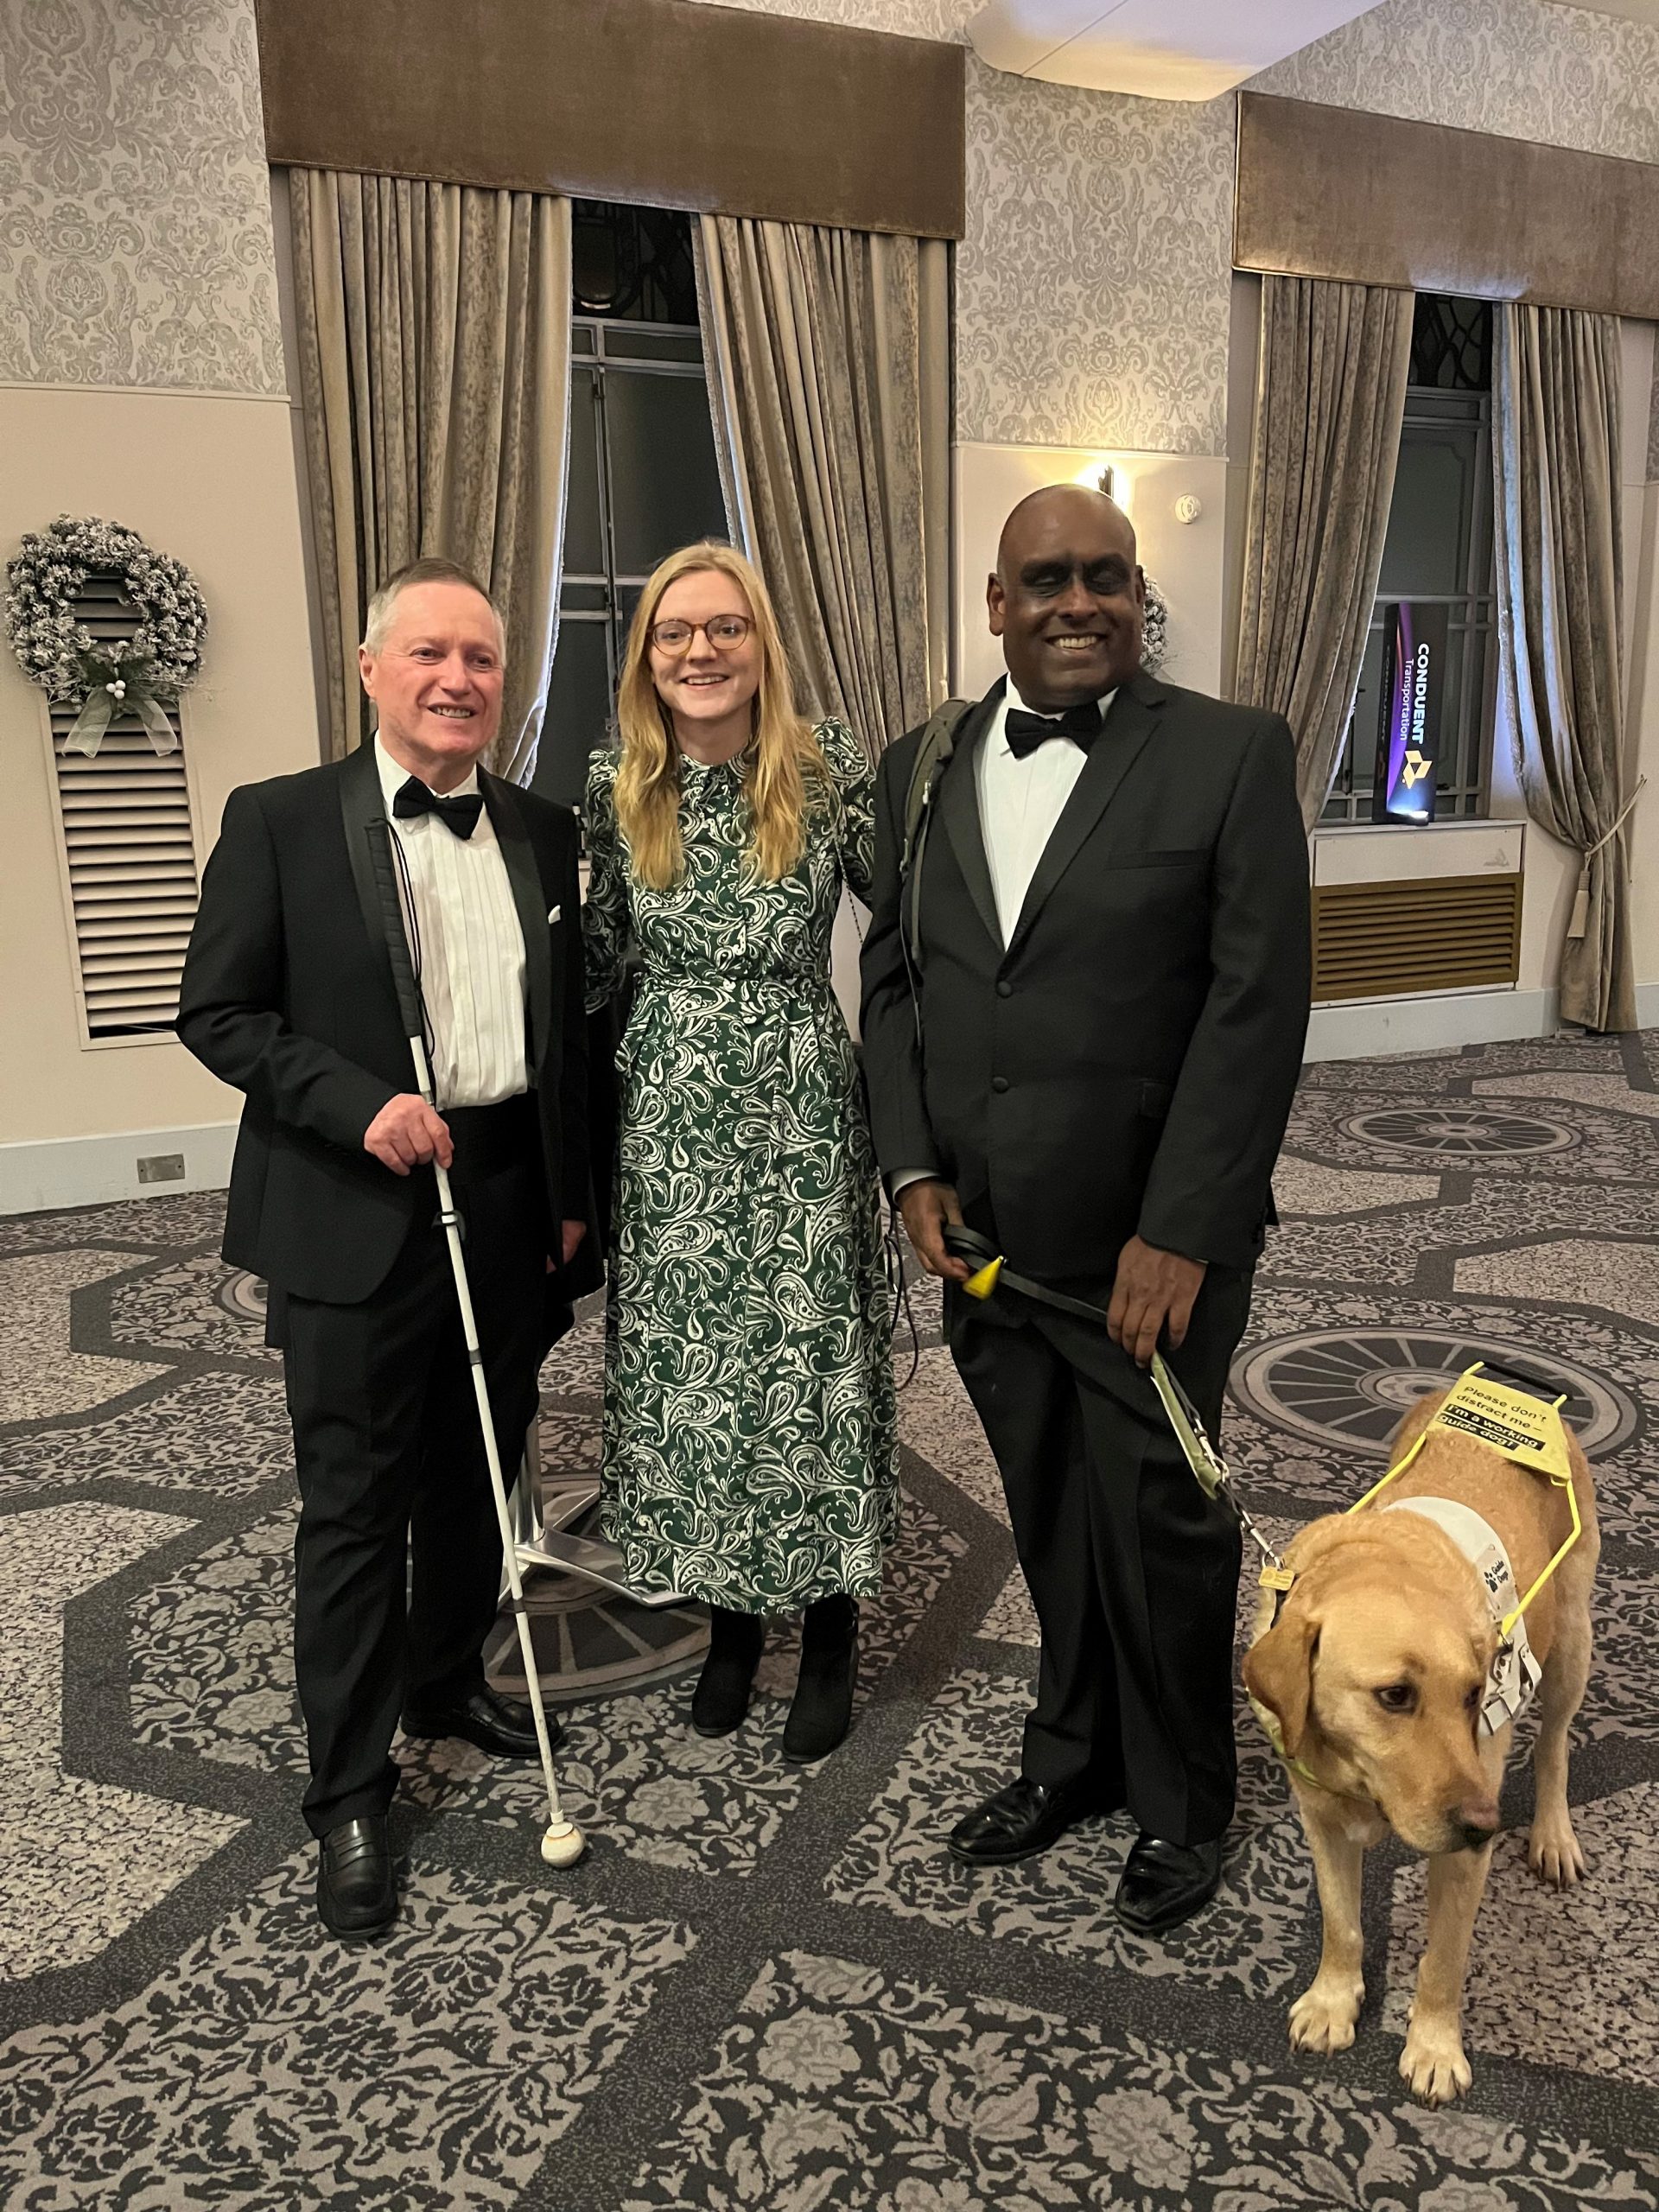 From left to right: Harry Meade, SW London SLC member, Lucy Williams, Senior Engagement Manager for South England, Haren Thillainathan, SW London SLC member, and Guide Dog Addi. They are stood in the foyer of the Connaught Rooms, London. Harry and Haren are wearing black tuxedos, and Lucy is wearing a full length, green and white dress. They are all facing the camera, smiling.